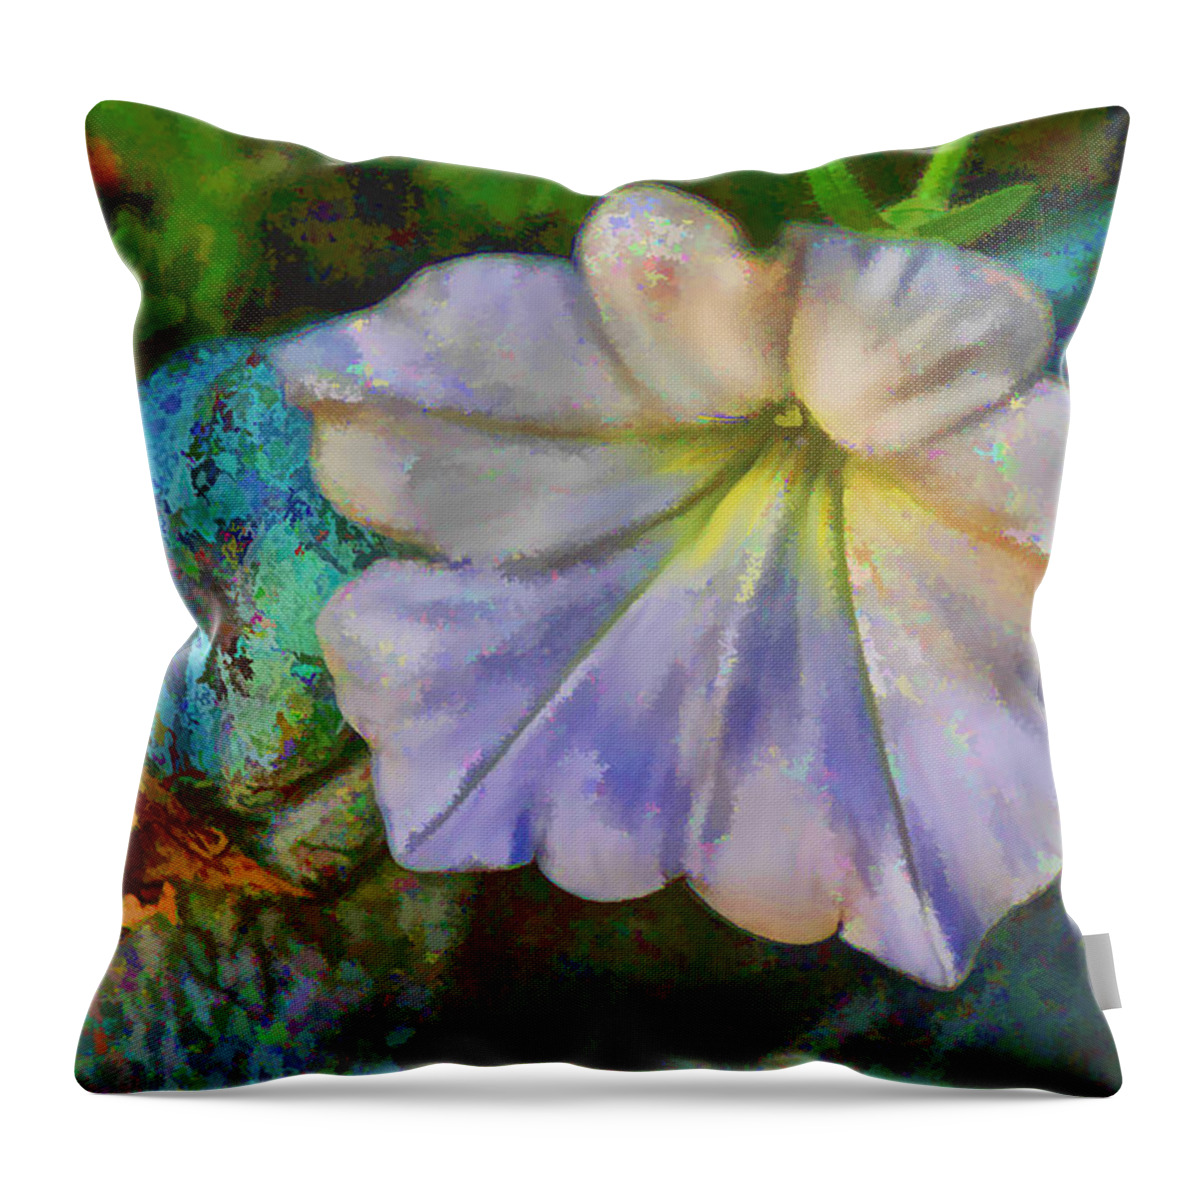 Petunia Throw Pillow featuring the photograph Petunia by Bonnie Willis